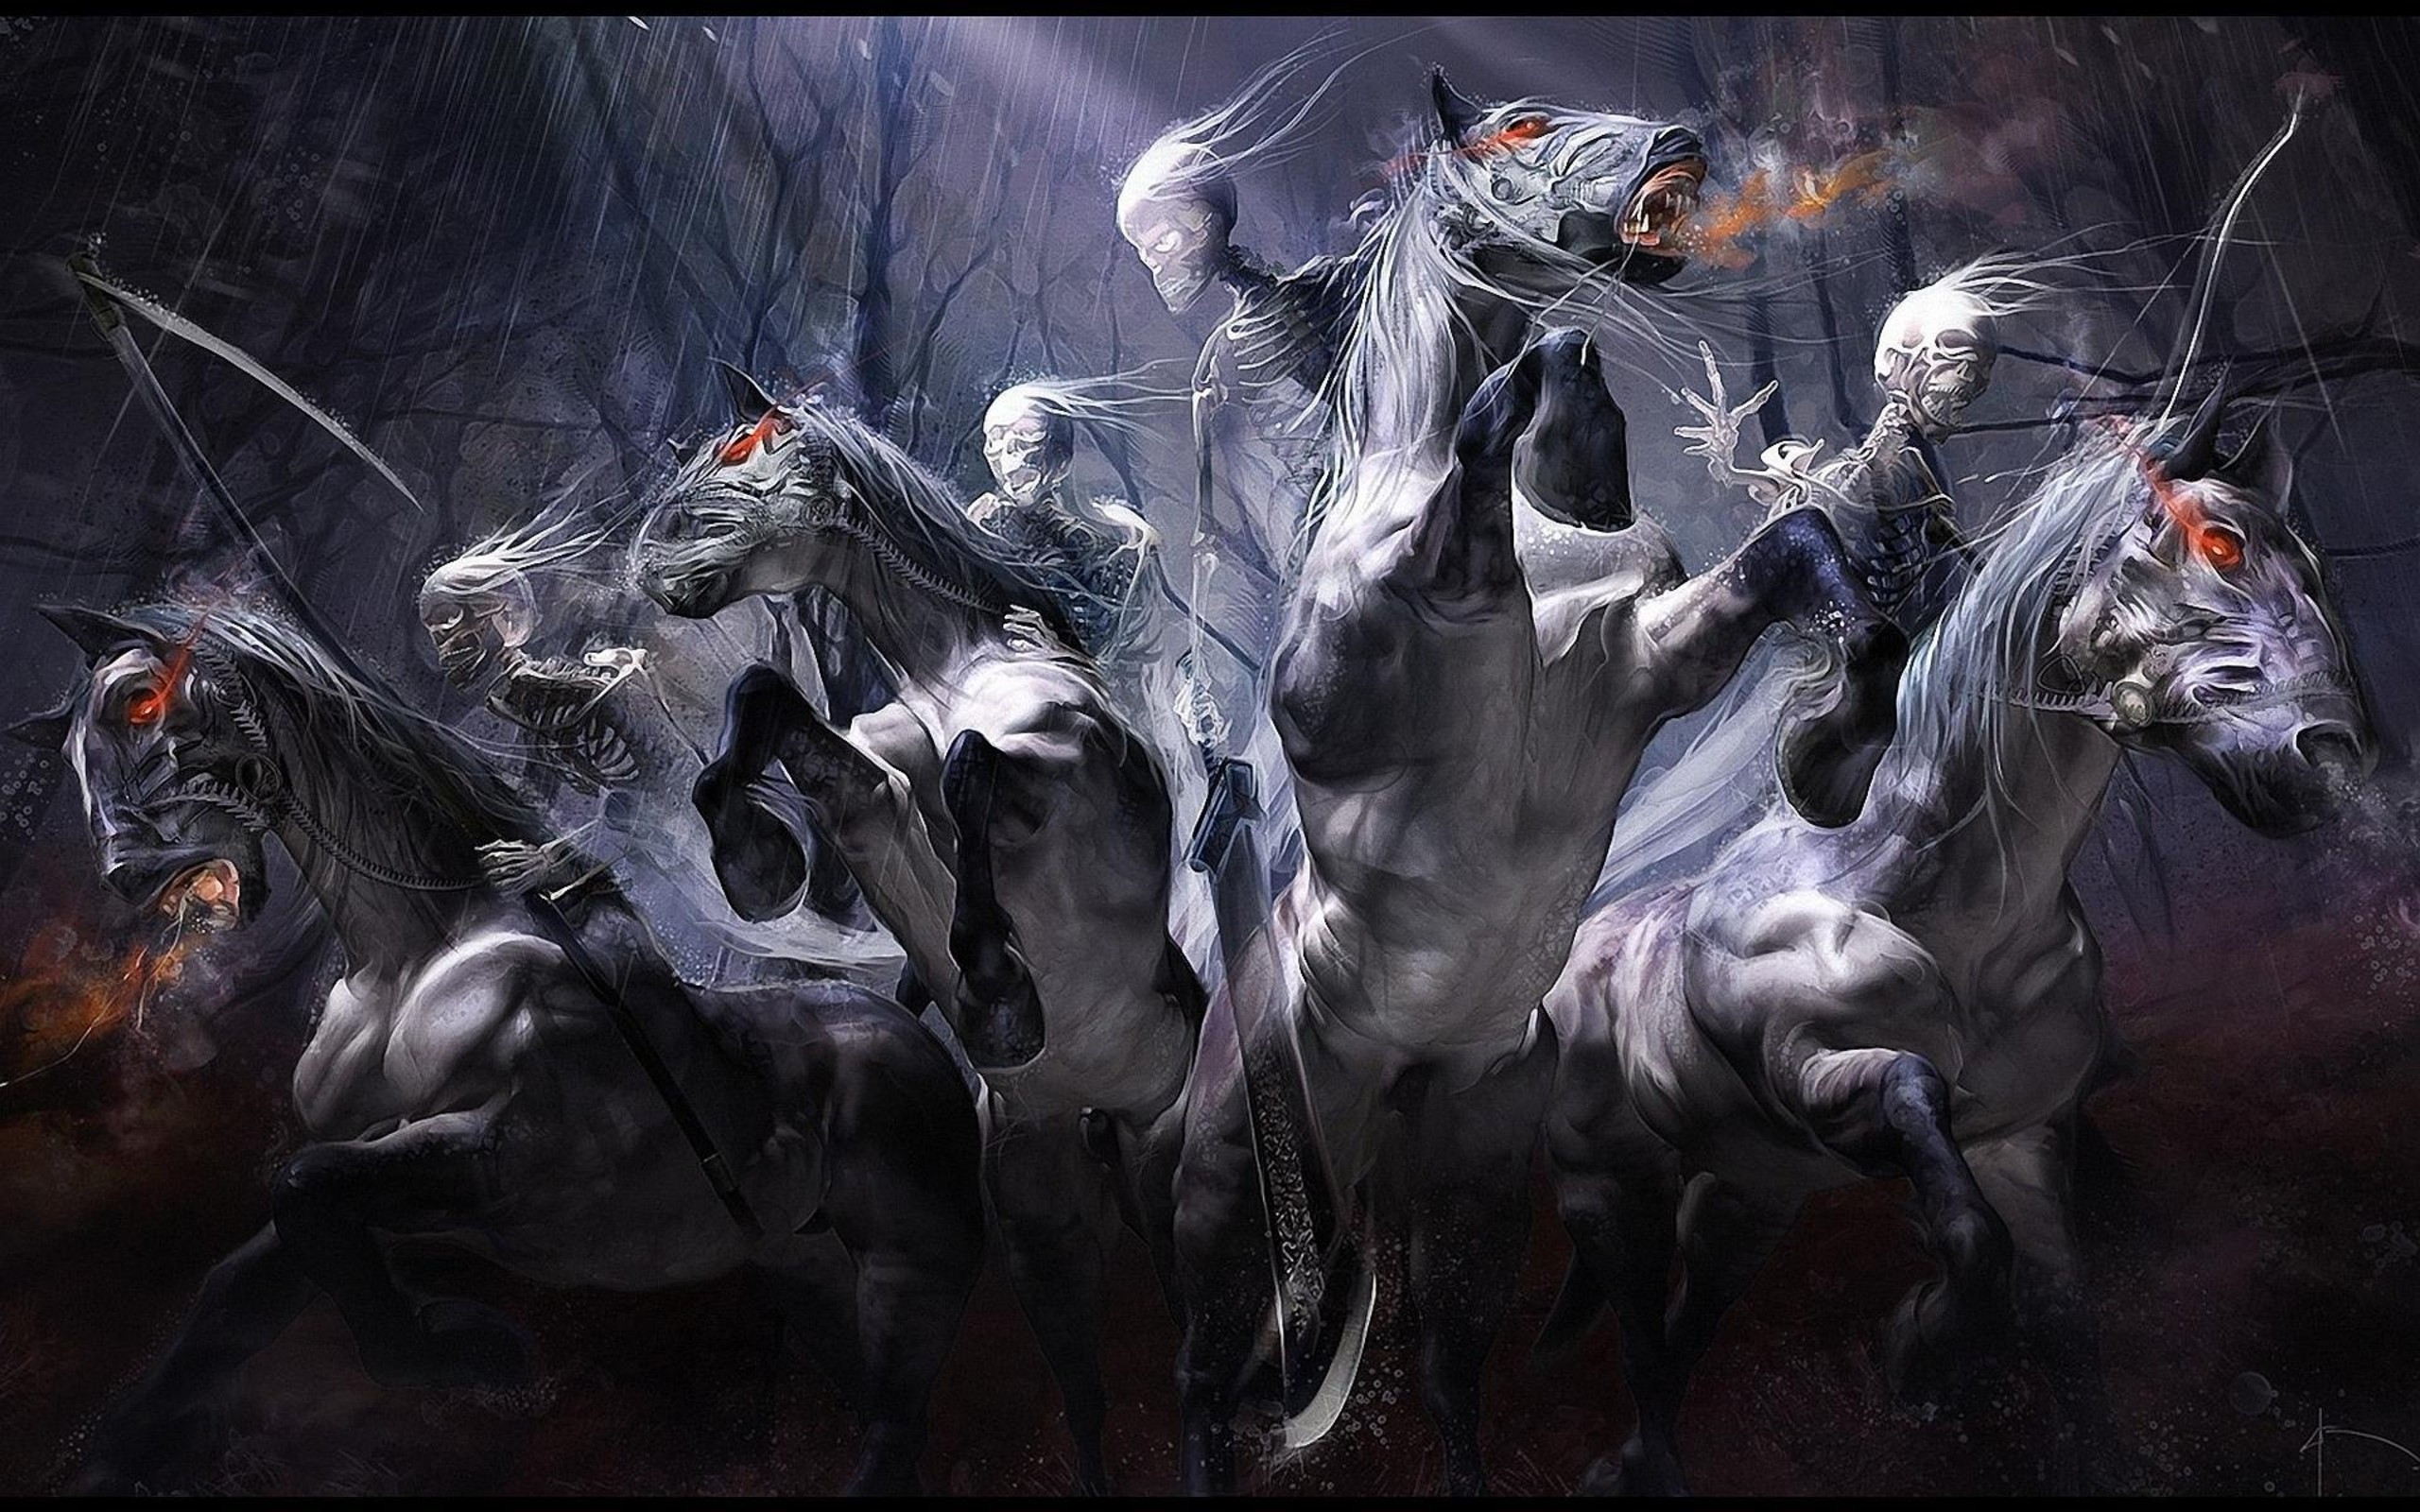 The skeletons of horses wallpapers and images - wallpapers, pictures